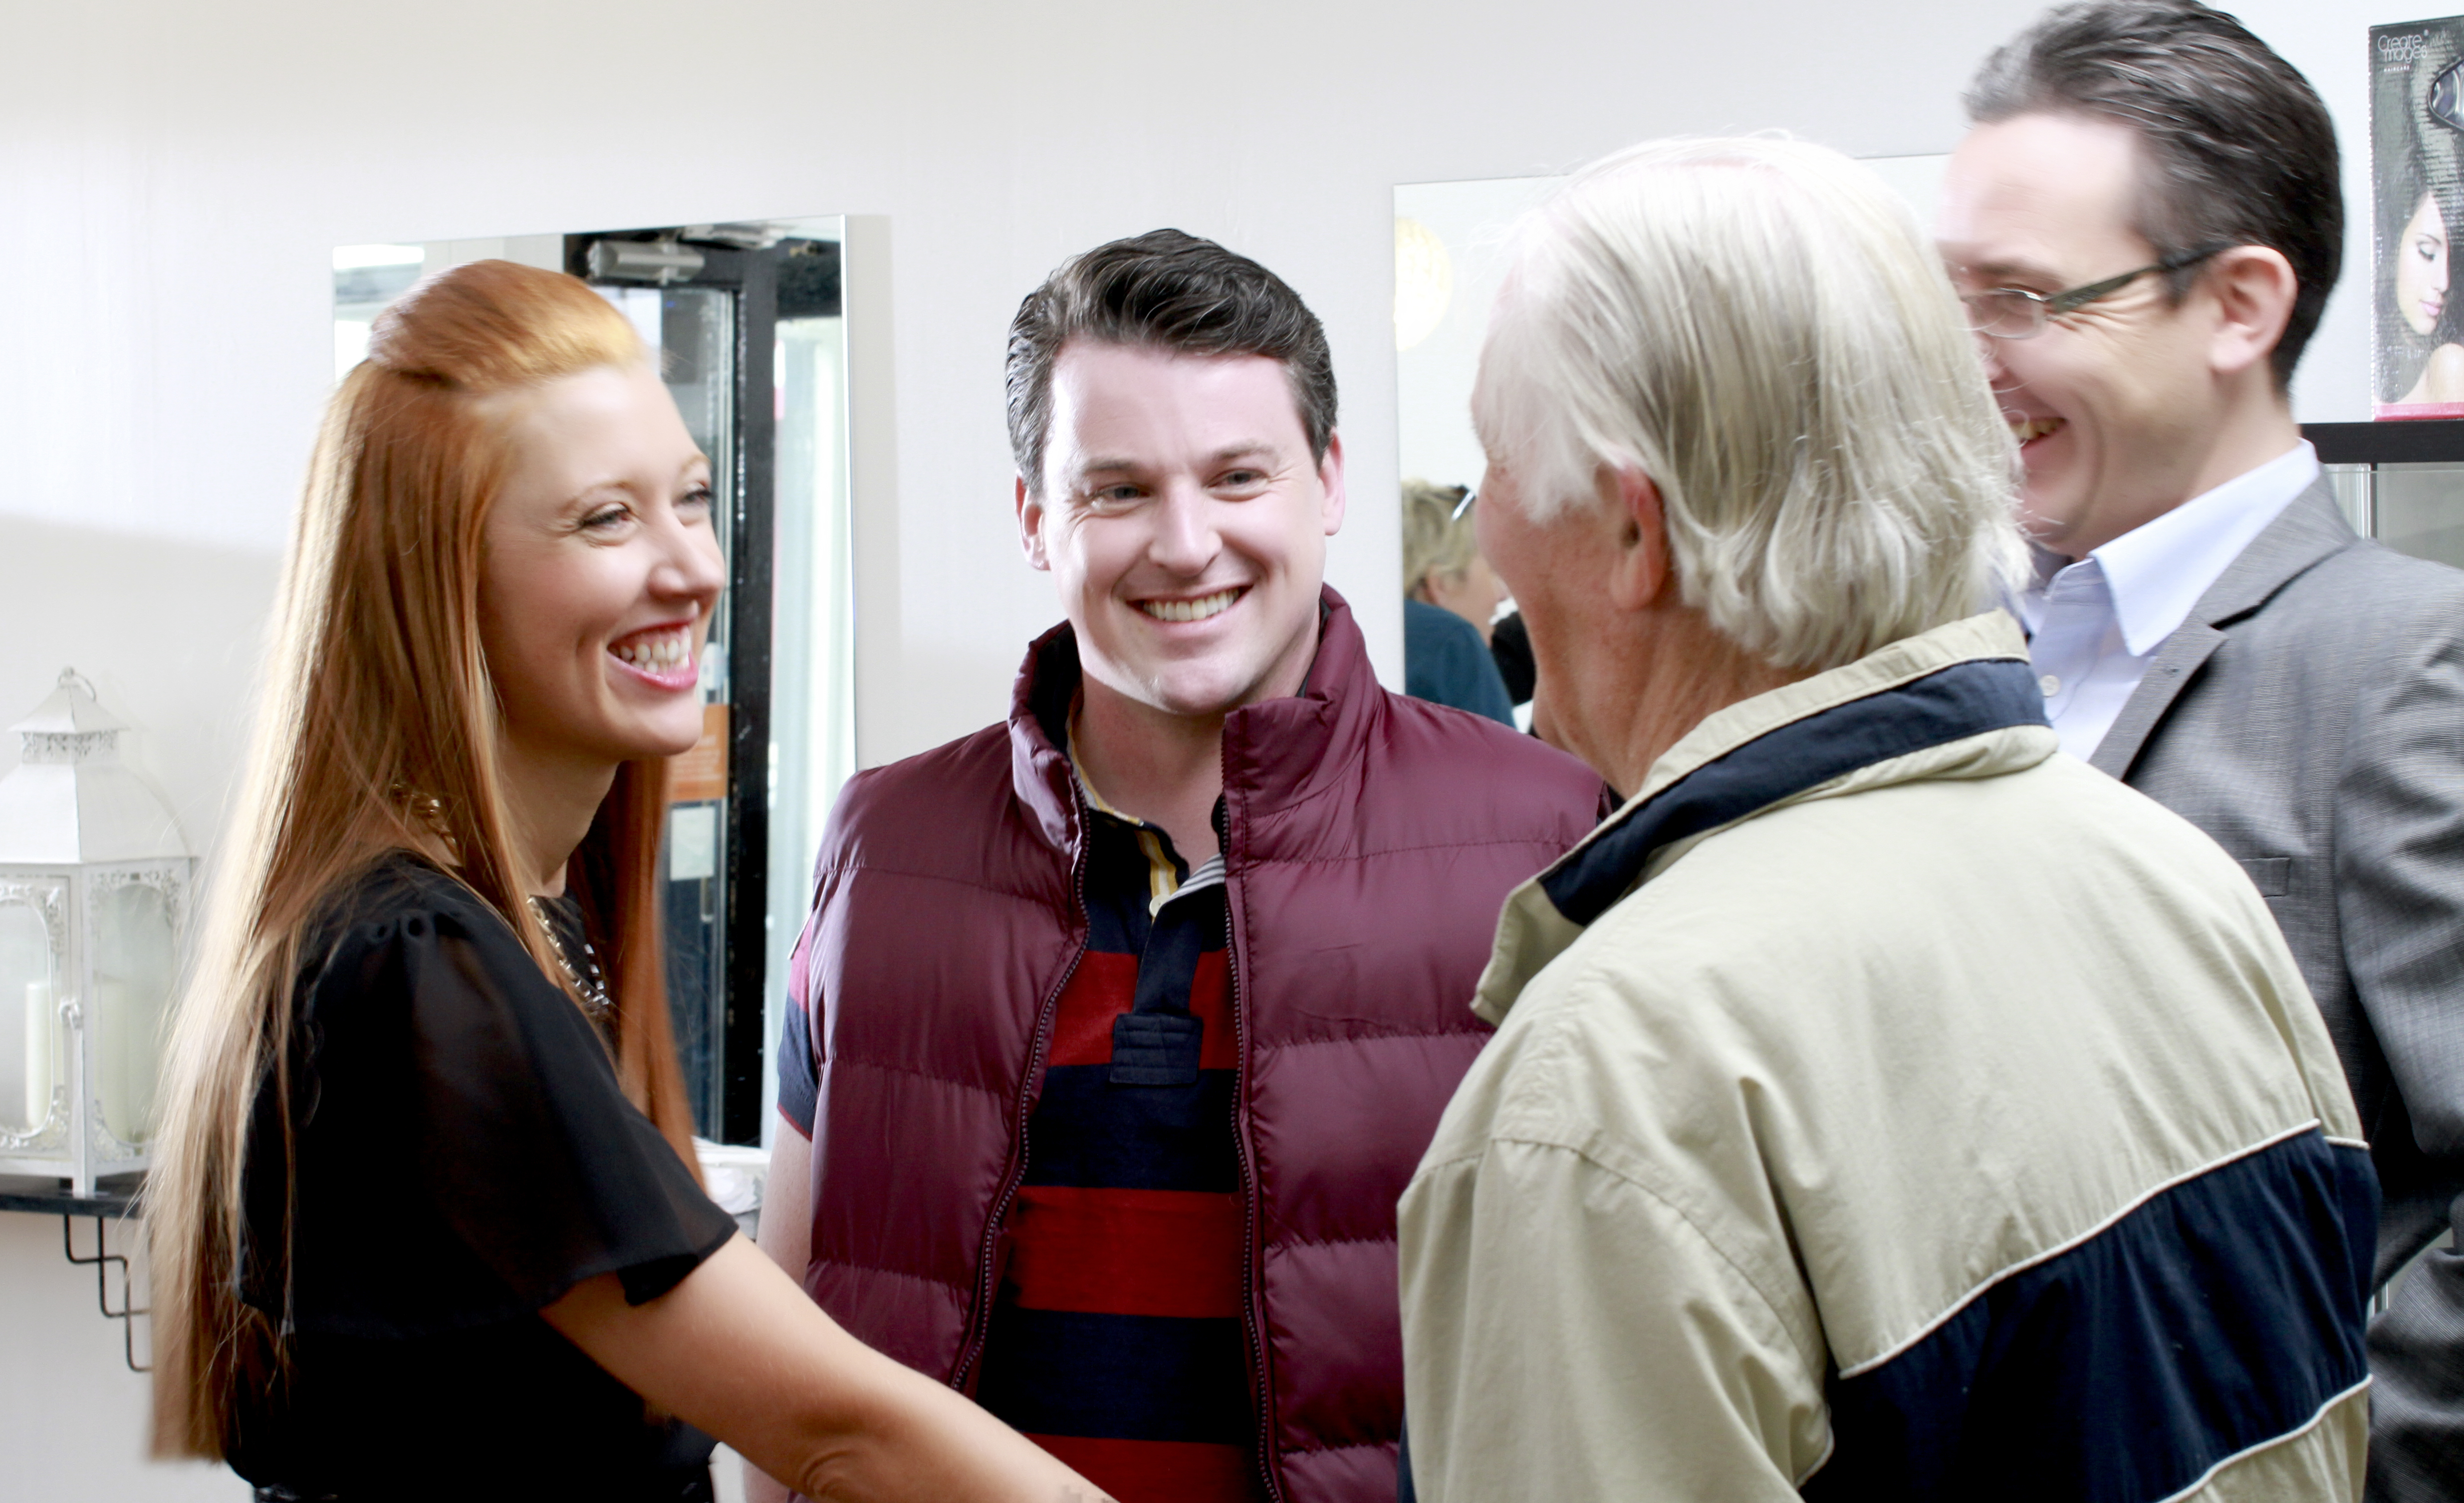 Amy Joyce Hastings, Declan Reynolds, Stephen Gibson (Producer) speaking with director Jack Conroy on set of THE GAELIC CURSE (Oct 2014)